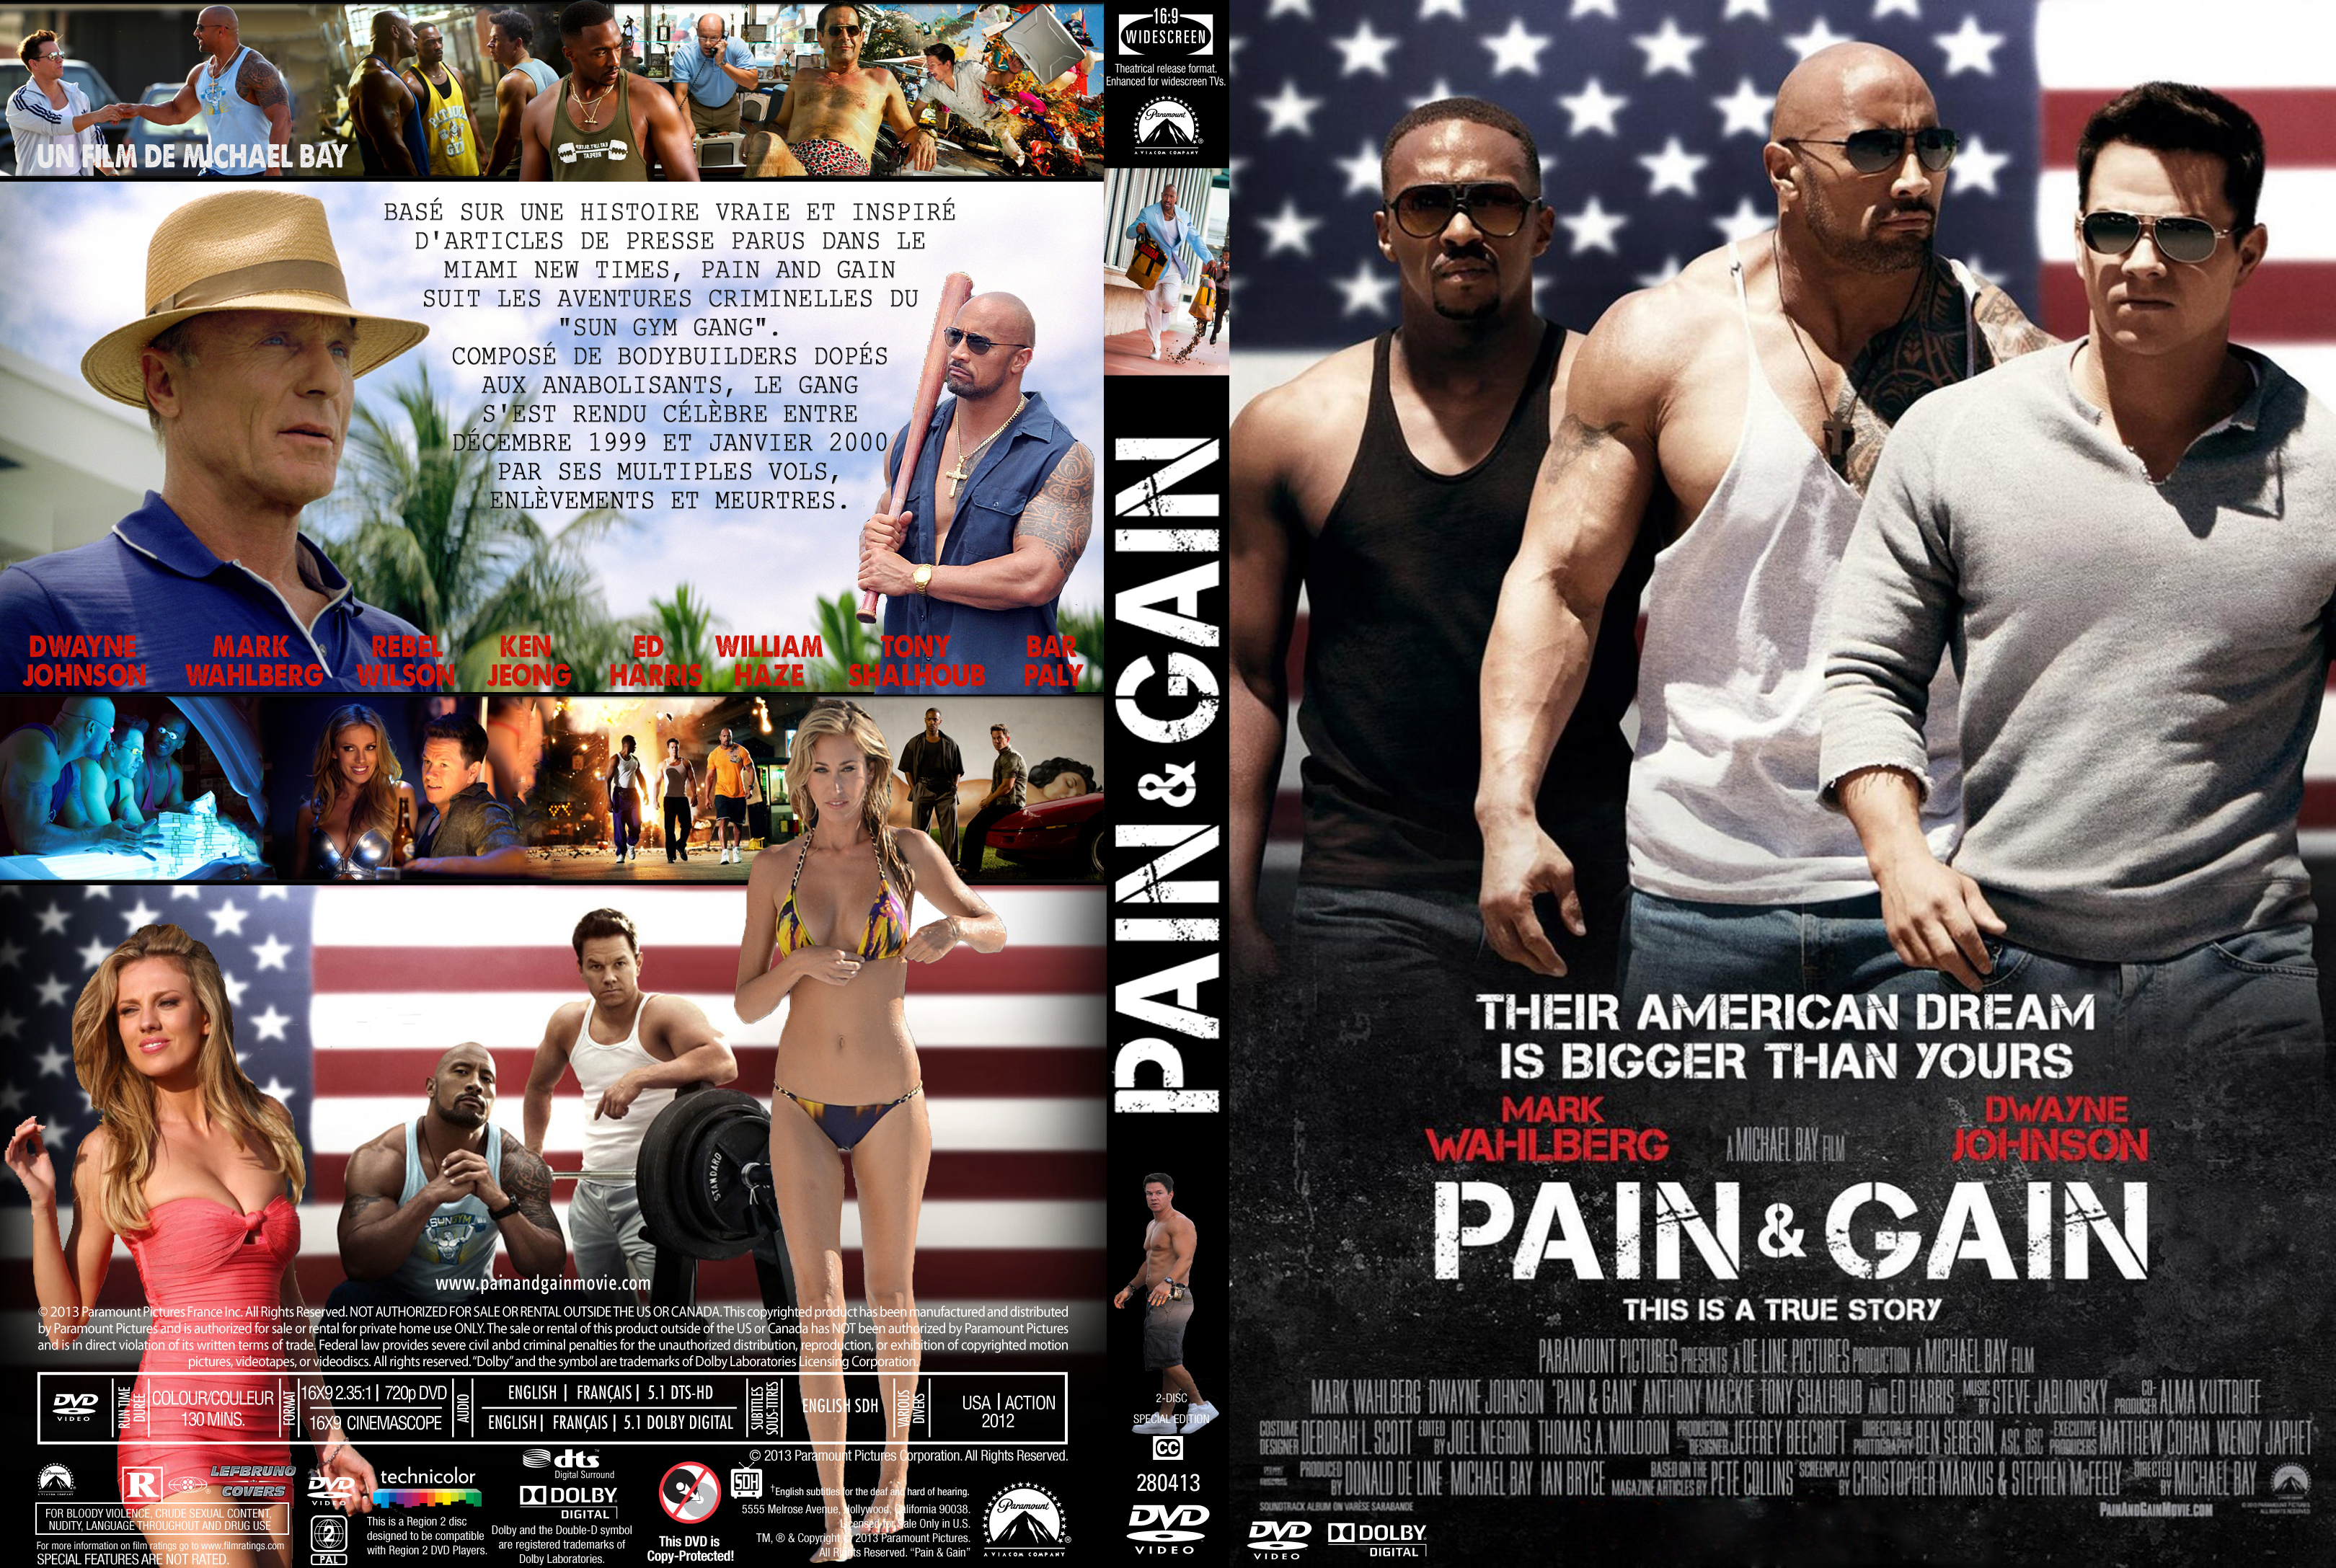 Jaquette DVD Pain and Gain custom